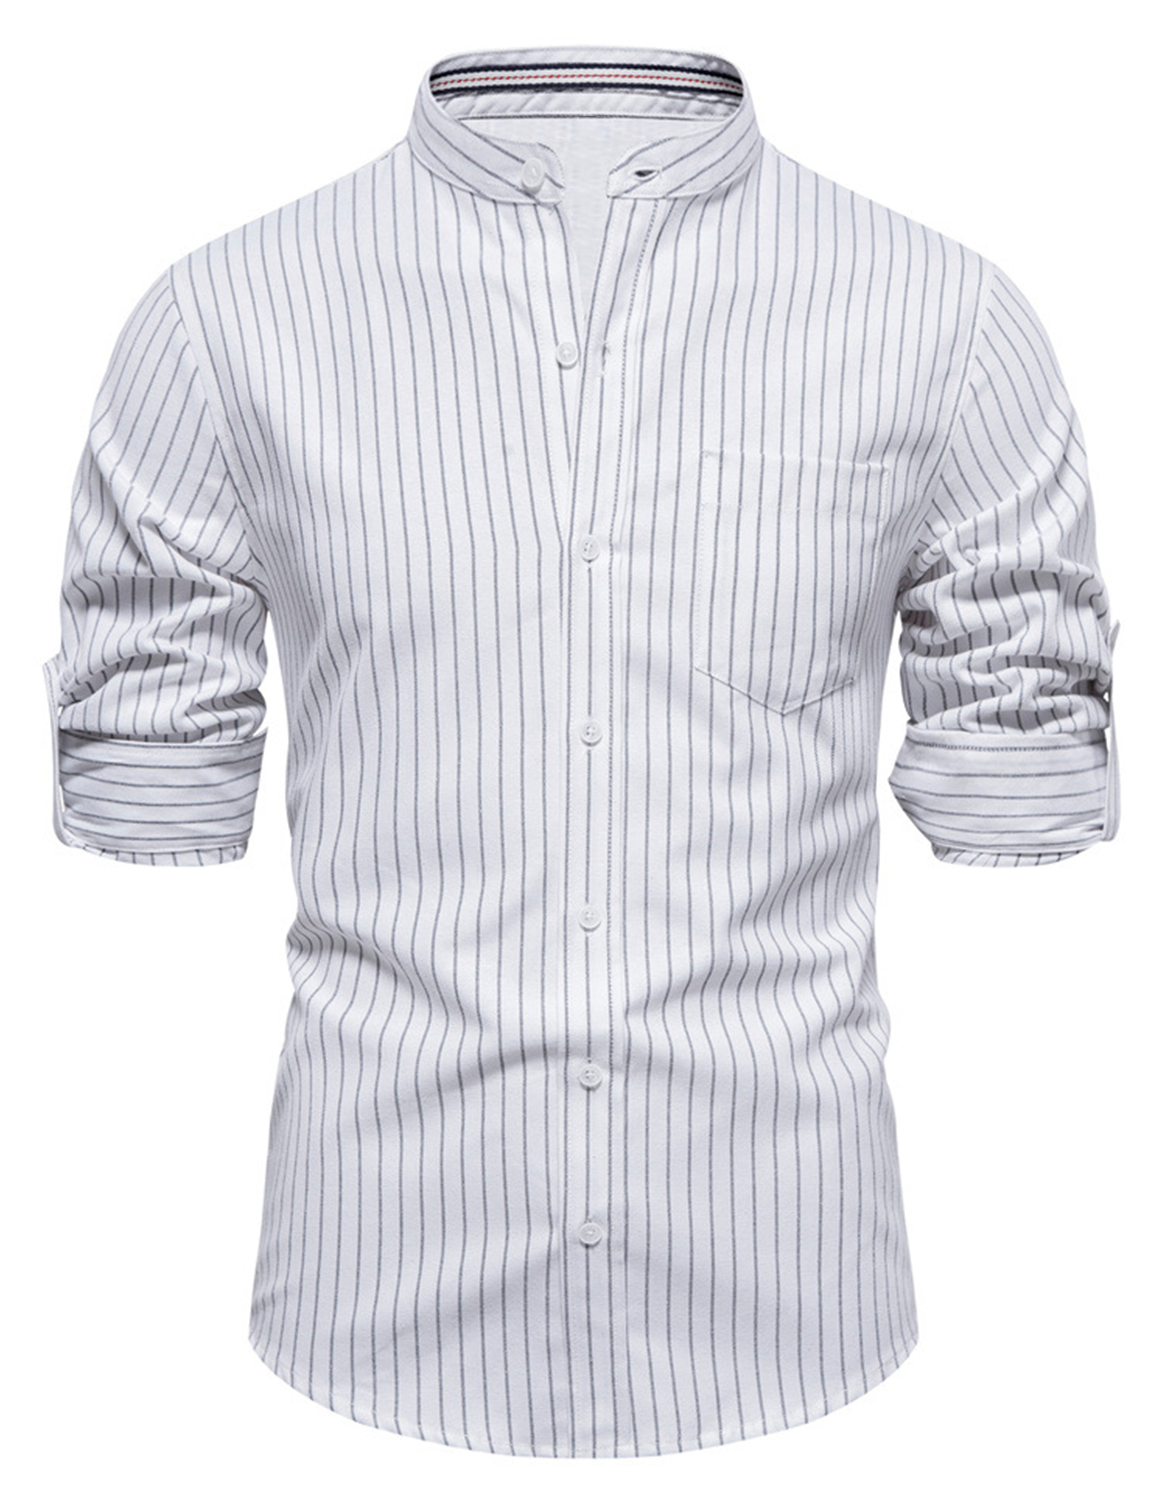 Men's Casual Striped Pocket Henry Collar Button Up Long Sleeve Shirt